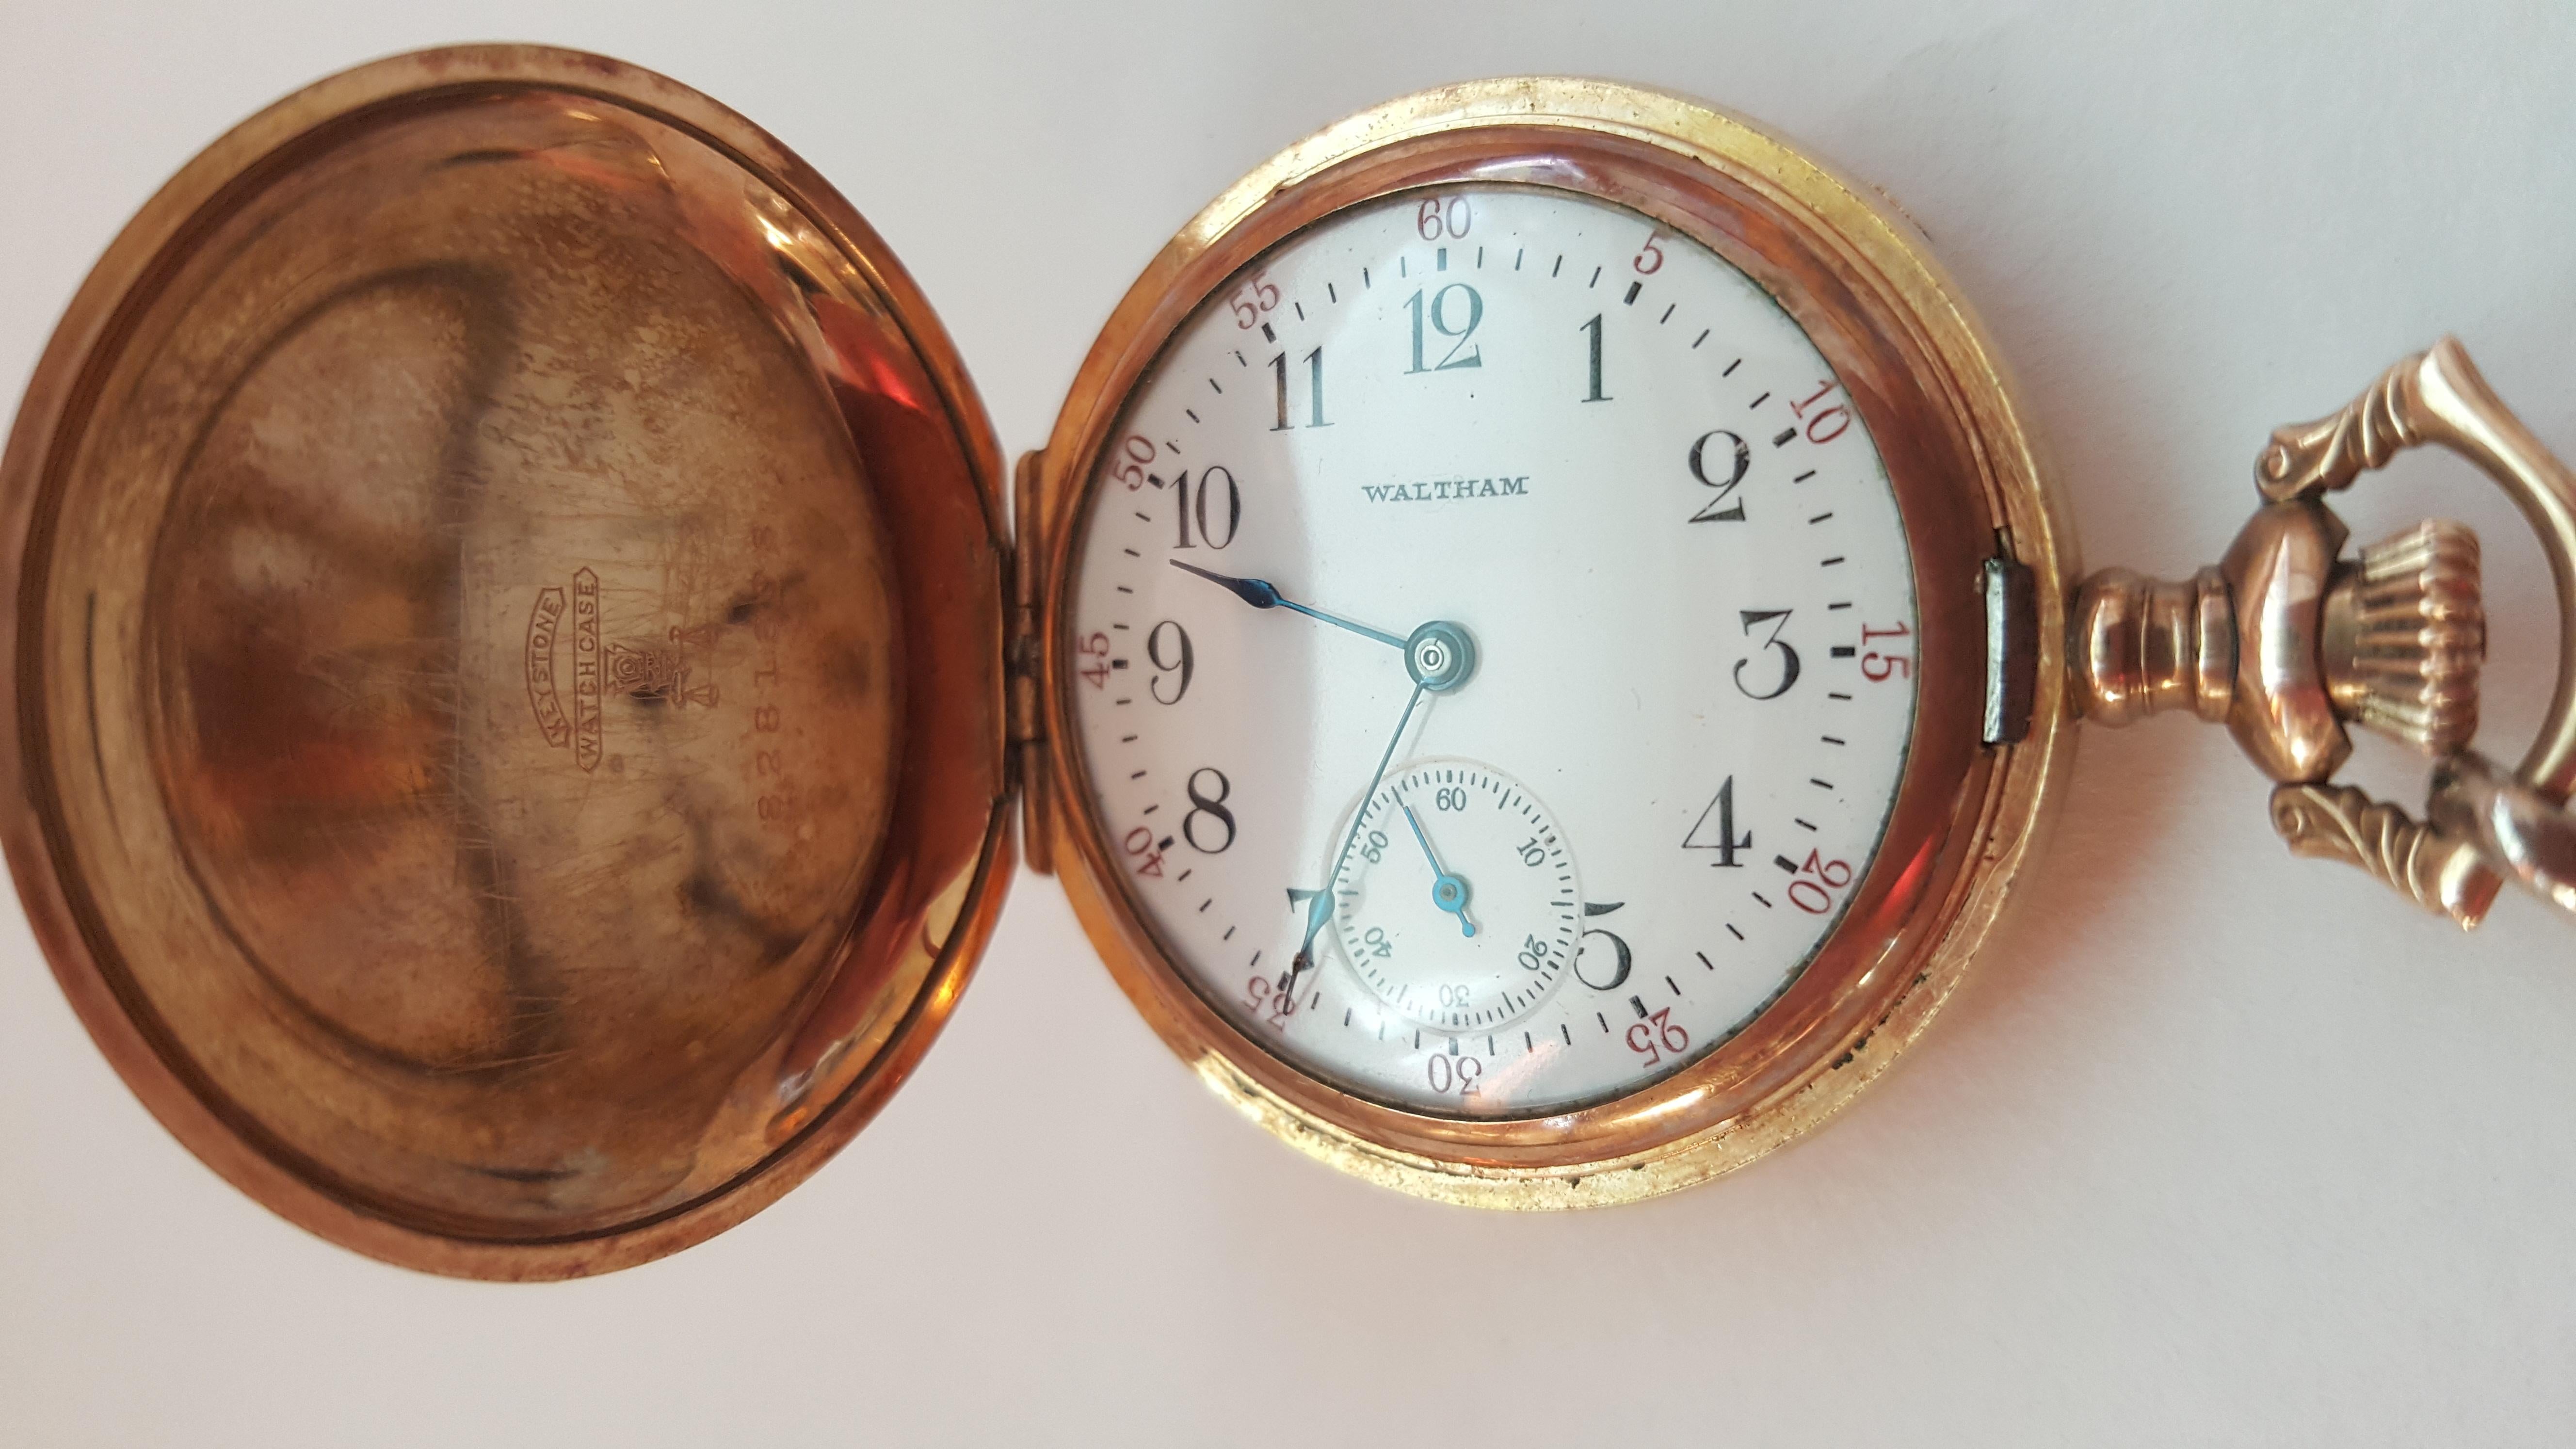 1908 Waltham Pocket Watch, Gold Plated, 7 Jewel, Size 0, Working, Black and Red Numerals, White Face, Engraved, Model 1907, Serial 17339651, Excellent condition.
It was given as a gift in 1912, there's an engraving that says 